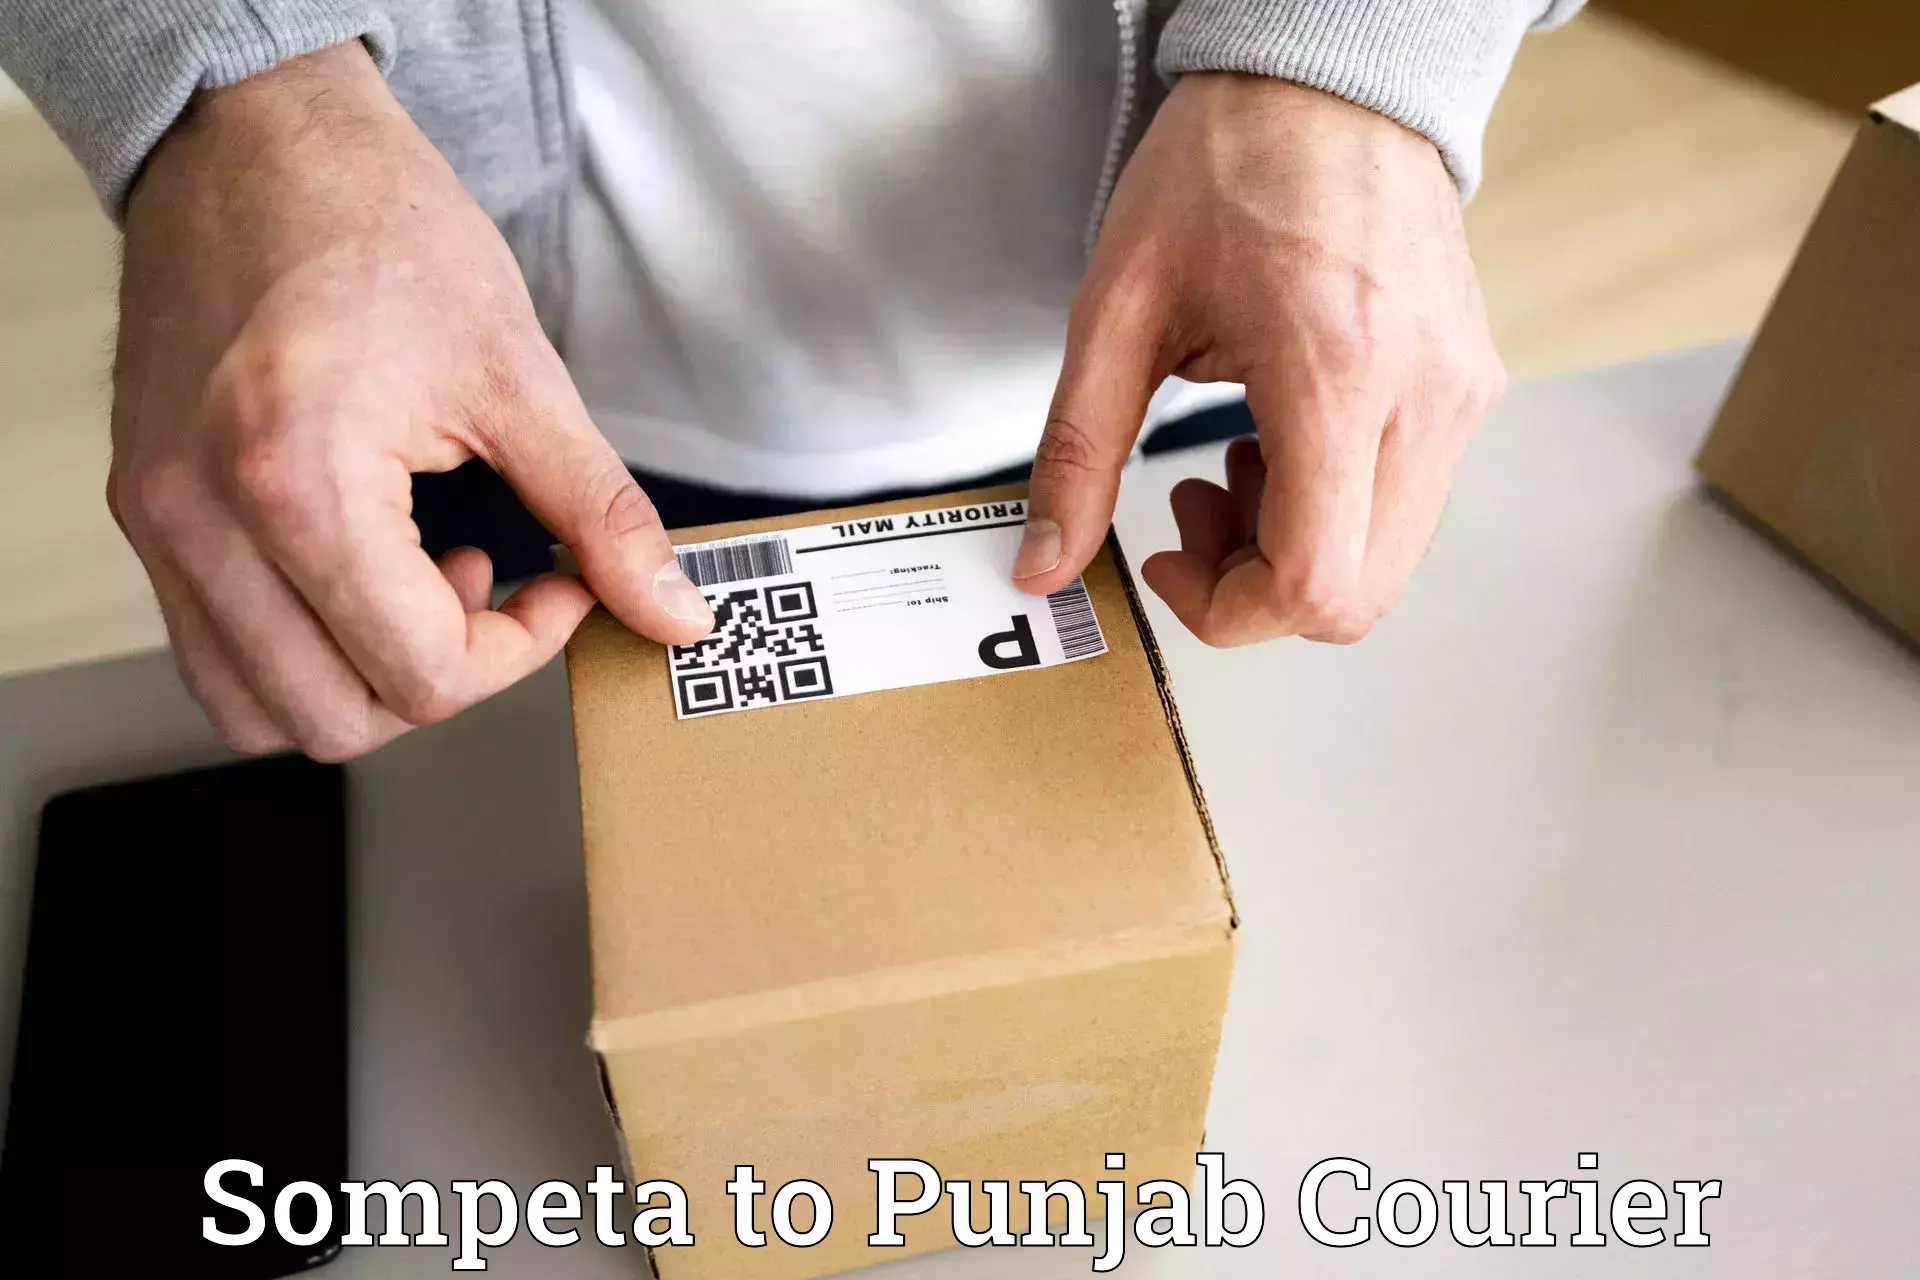 Customizable shipping options Sompeta to Sultanpur Lodhi